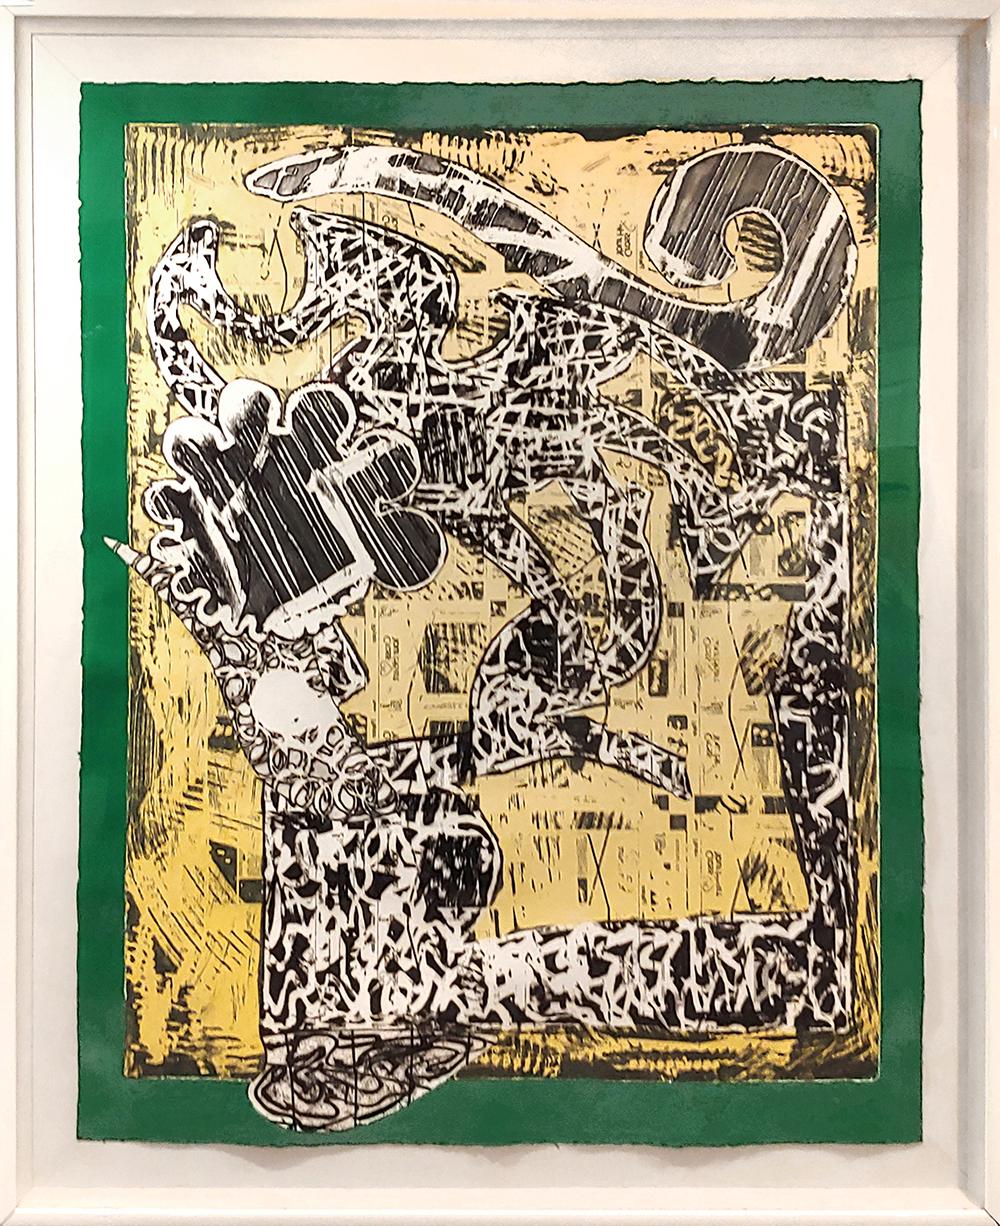 "Green Journal" 76x62x3 Framed etching, screenprint, & Relief Edition of only 25